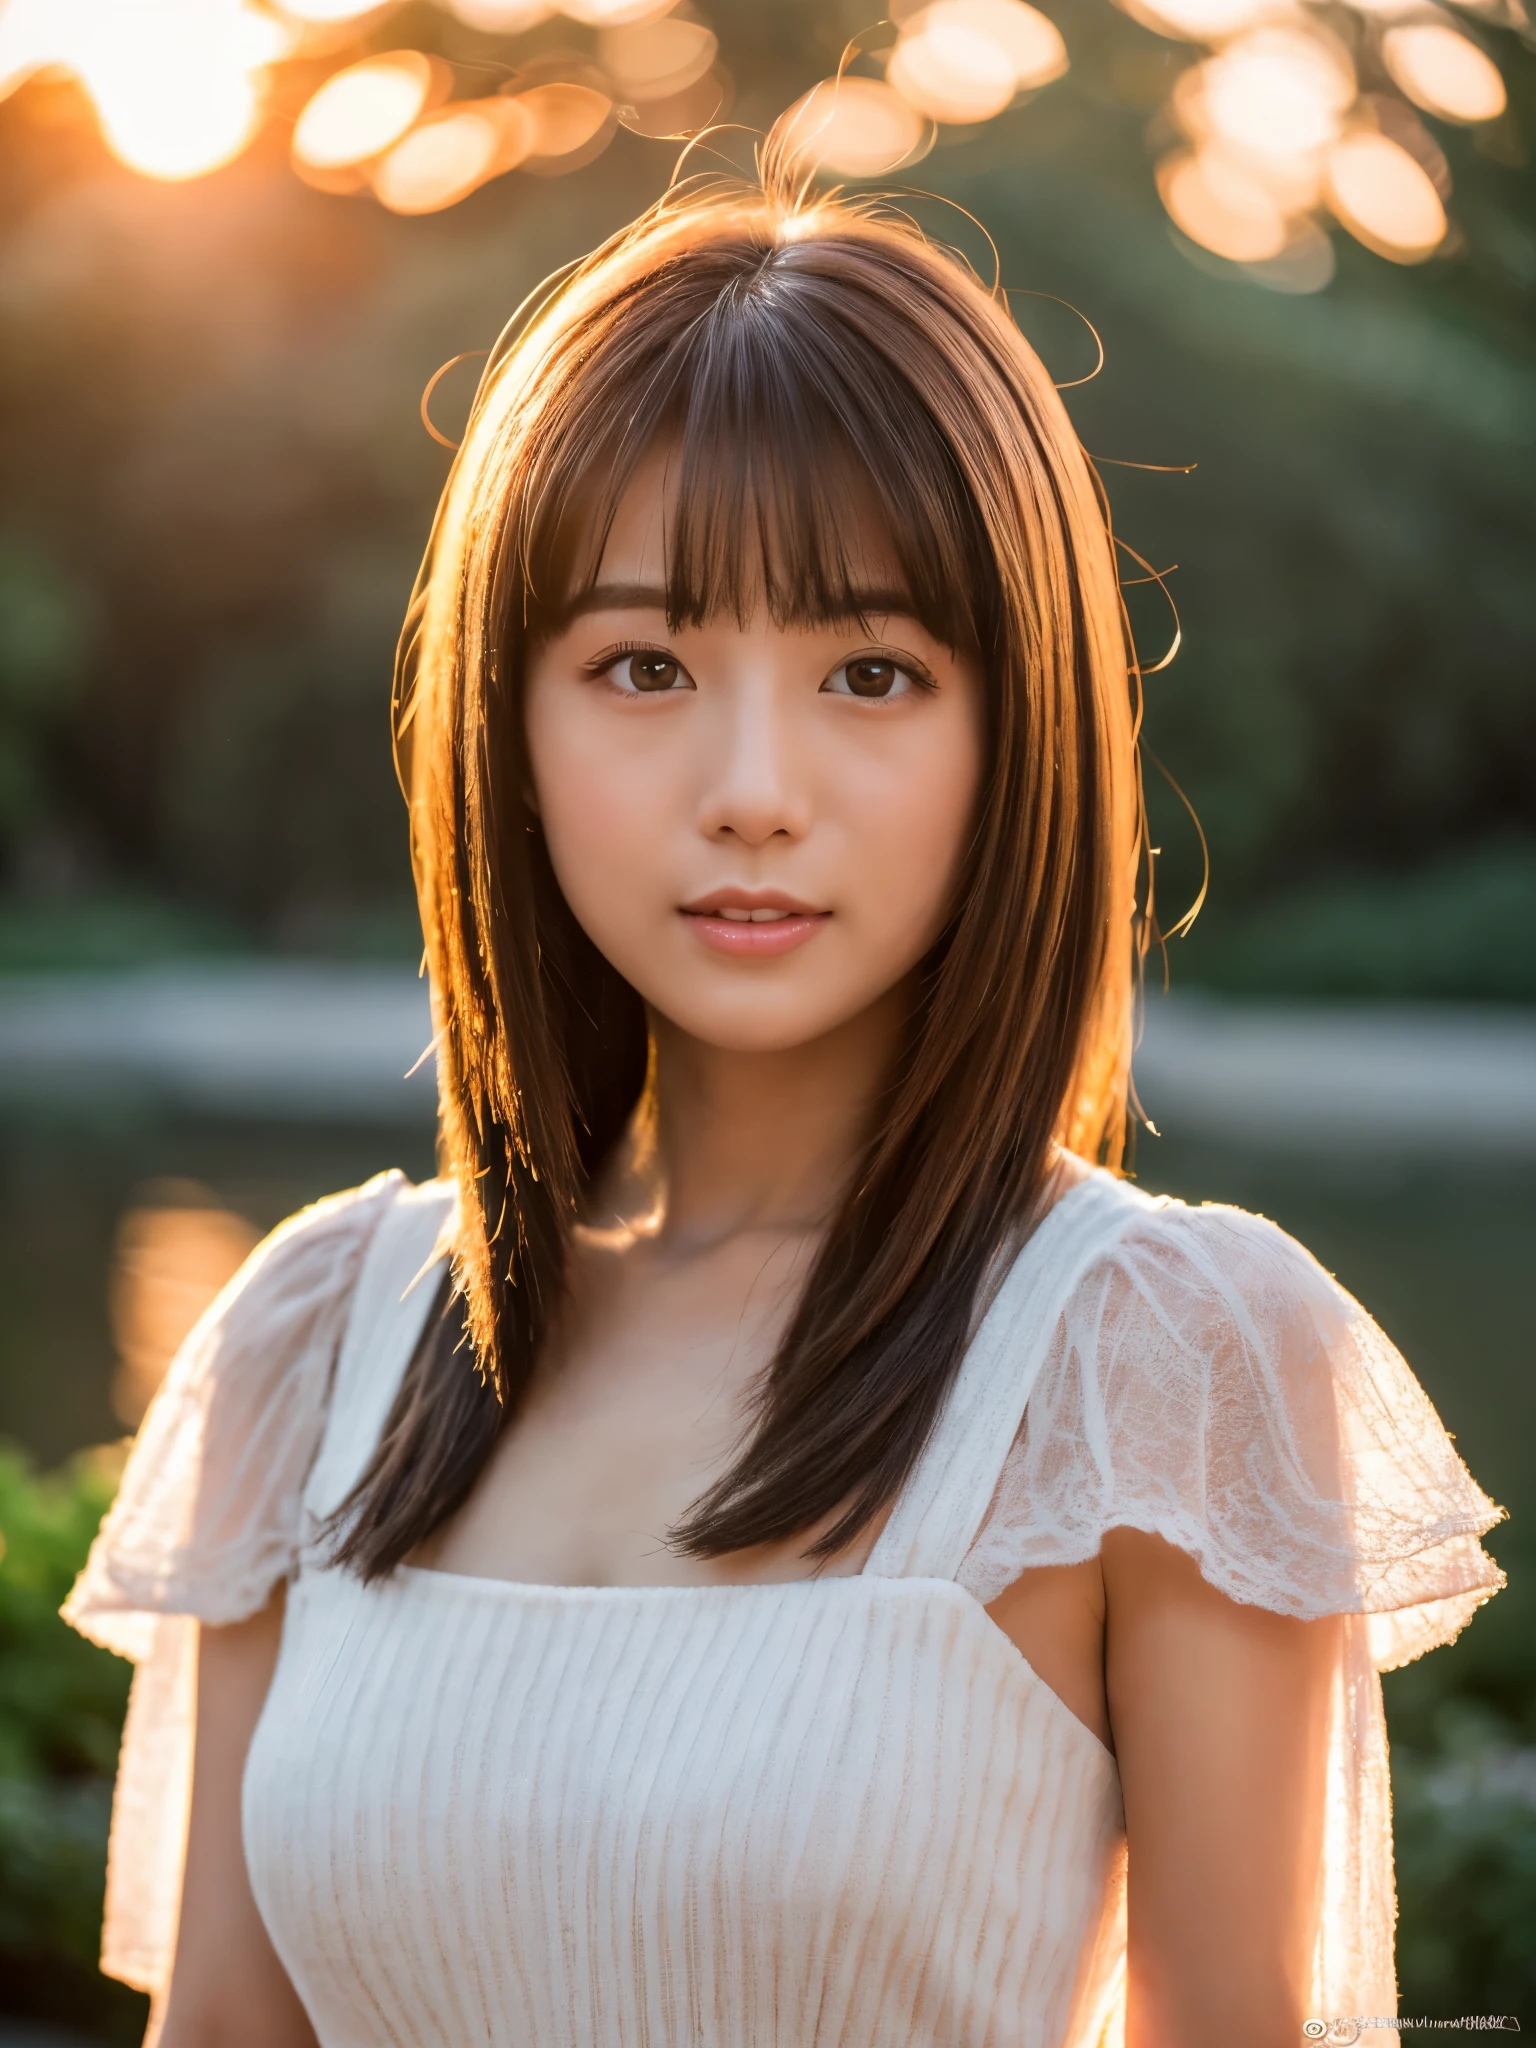 1 Japanese lady, Extremely beautiful, (Extremely cute), (extremely detailed beautiful face), Amazing face and eyes, rather dense hair、bob cuts、slightly brighter eyes、normal makeup、(Mini dress with camisole)、(Best Quality:1.4), (Ultra-detailed), extremely detailed CG unified 8k wallpaper, A hyper-realistic, (Photorealsitic:1.4), full body Esbian、Raw photography, professional photograpy, Cinematic lighting, Realistic portrait, ((Bokeh)), (depth of fields:1.4), (View photographer:1.3)、40 years old、(Inokashira Park),(Inokashira Pond)、(full body Esbian)、Accurate eyes、Beautiful mouth、(Keep your mouth completely closed)、(early evening:1.3)、(look at a camera)、(brilliant sunset:1.25)、(Orange evening sky:1.25)、no sleeveelancholy look